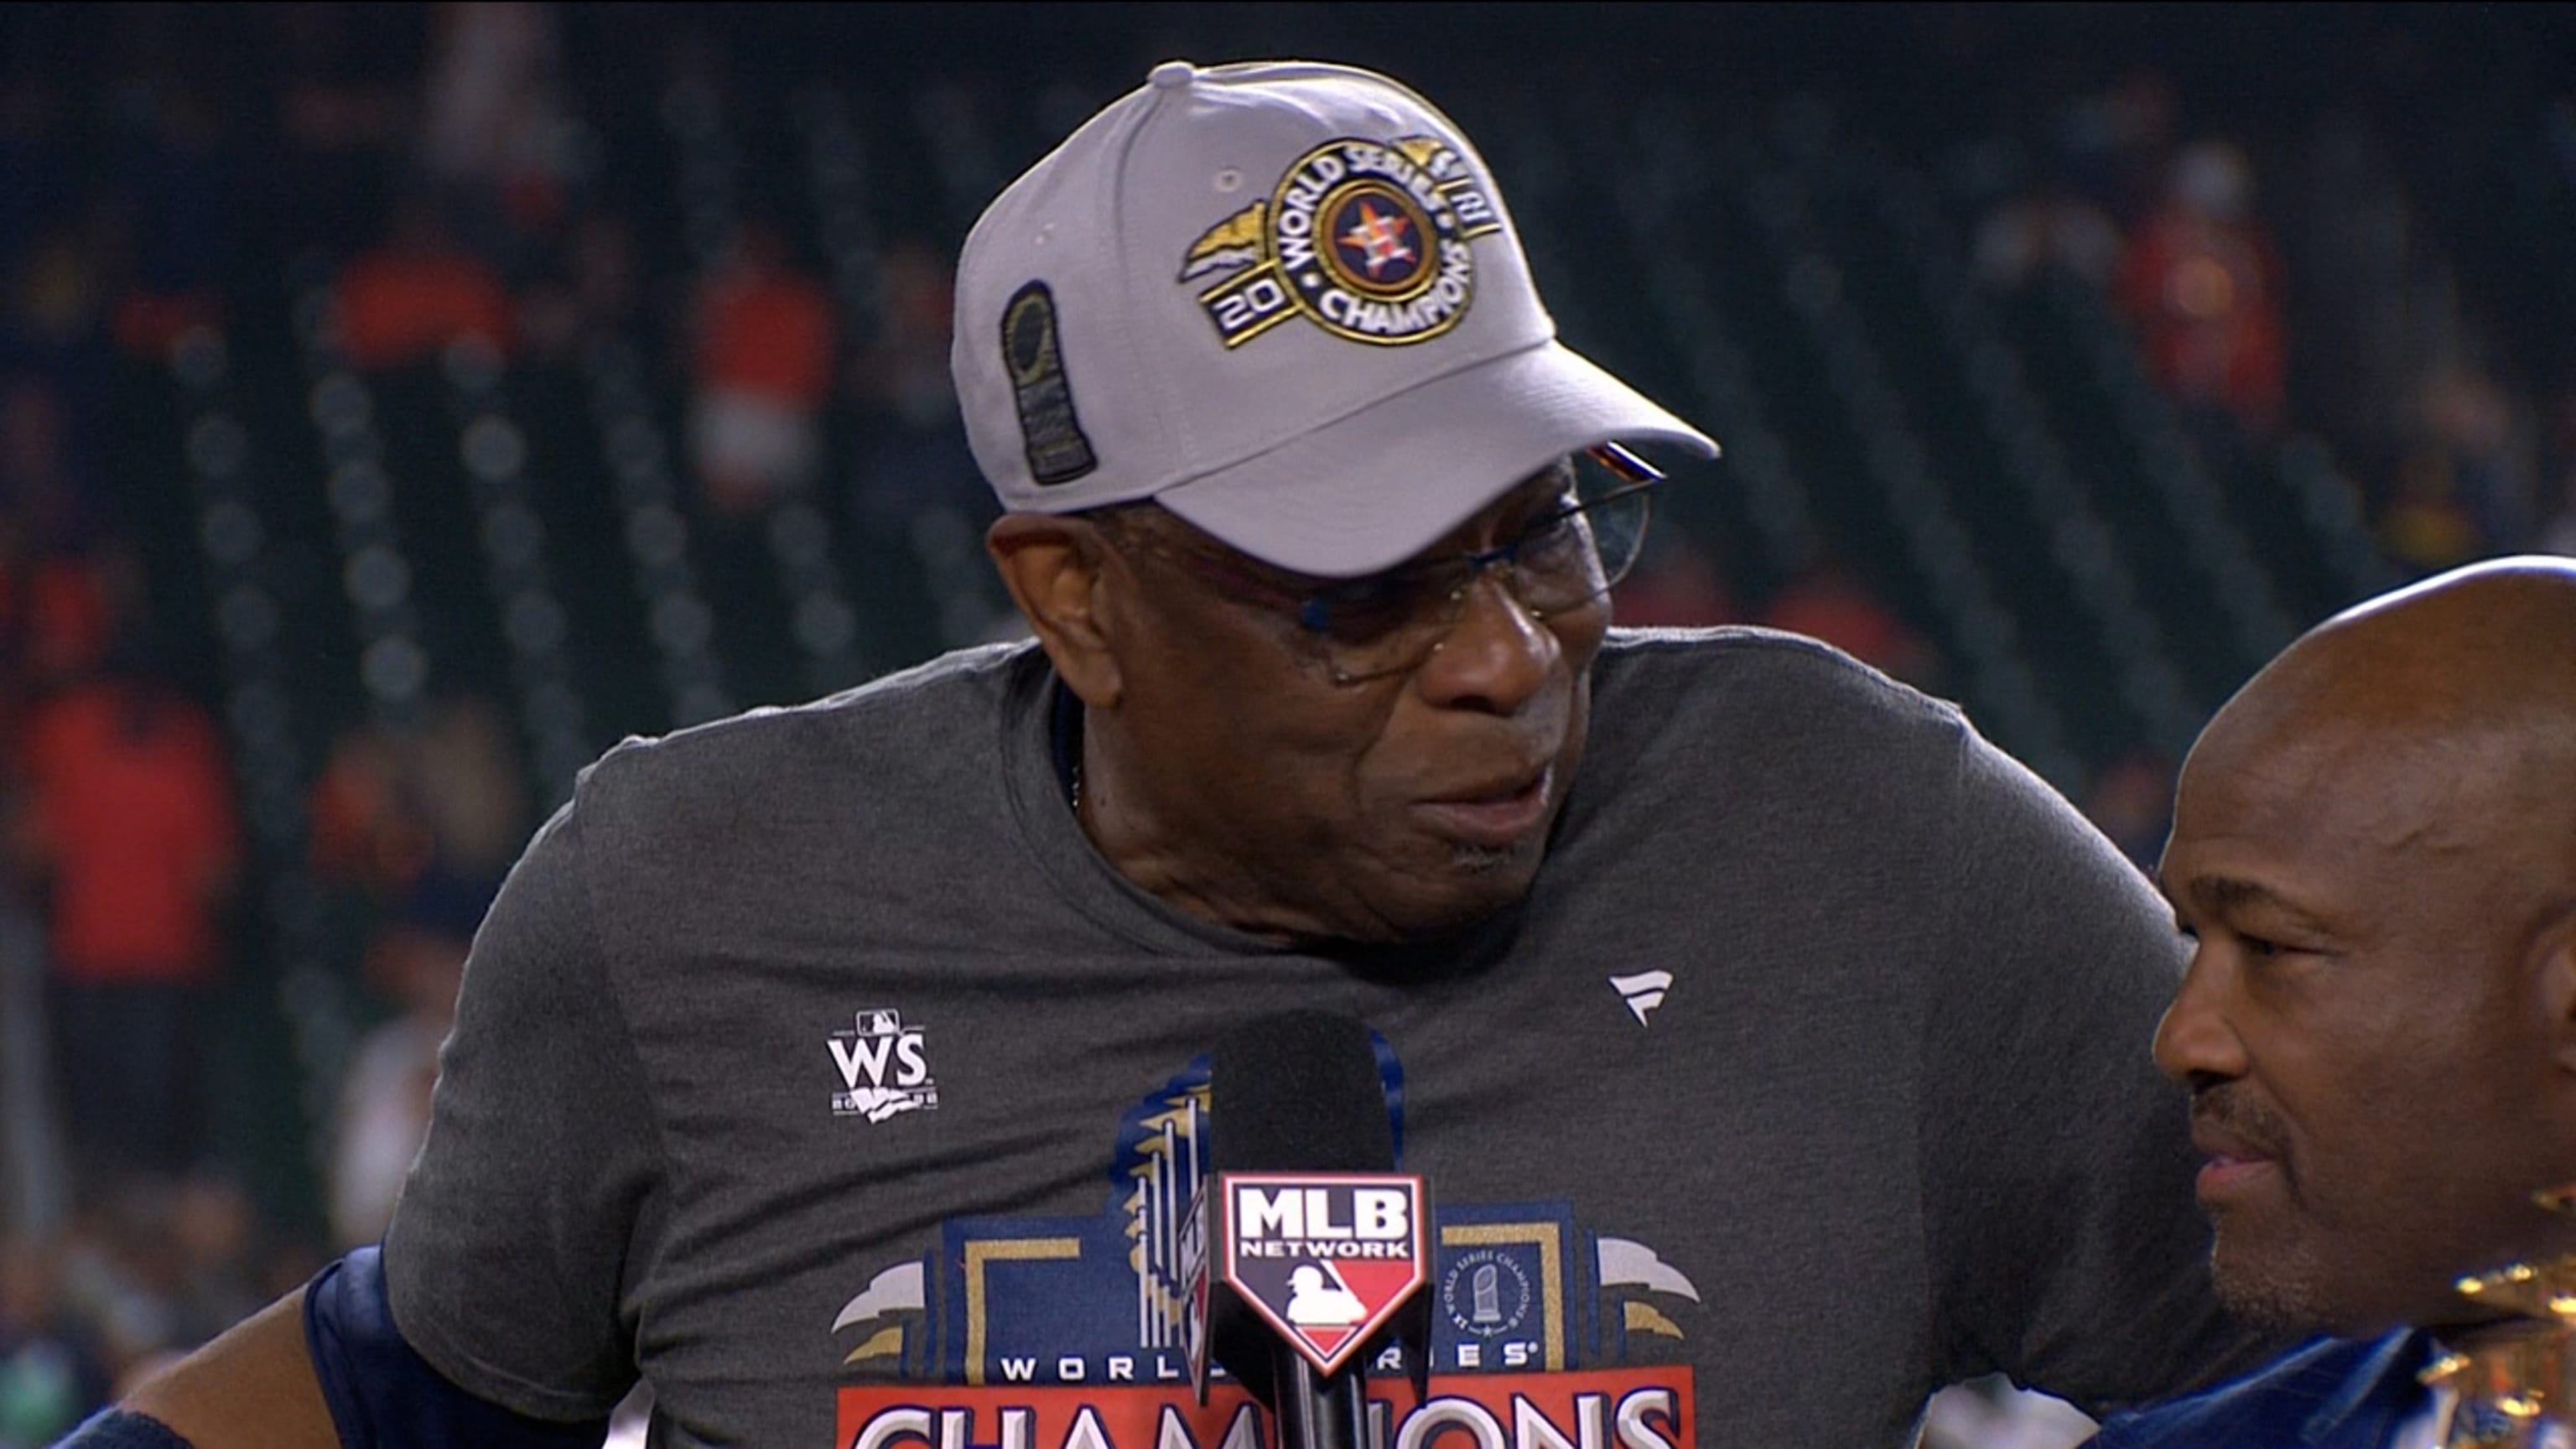 Padecky: Dusty Baker's first World Series title as manager was an  inspiration